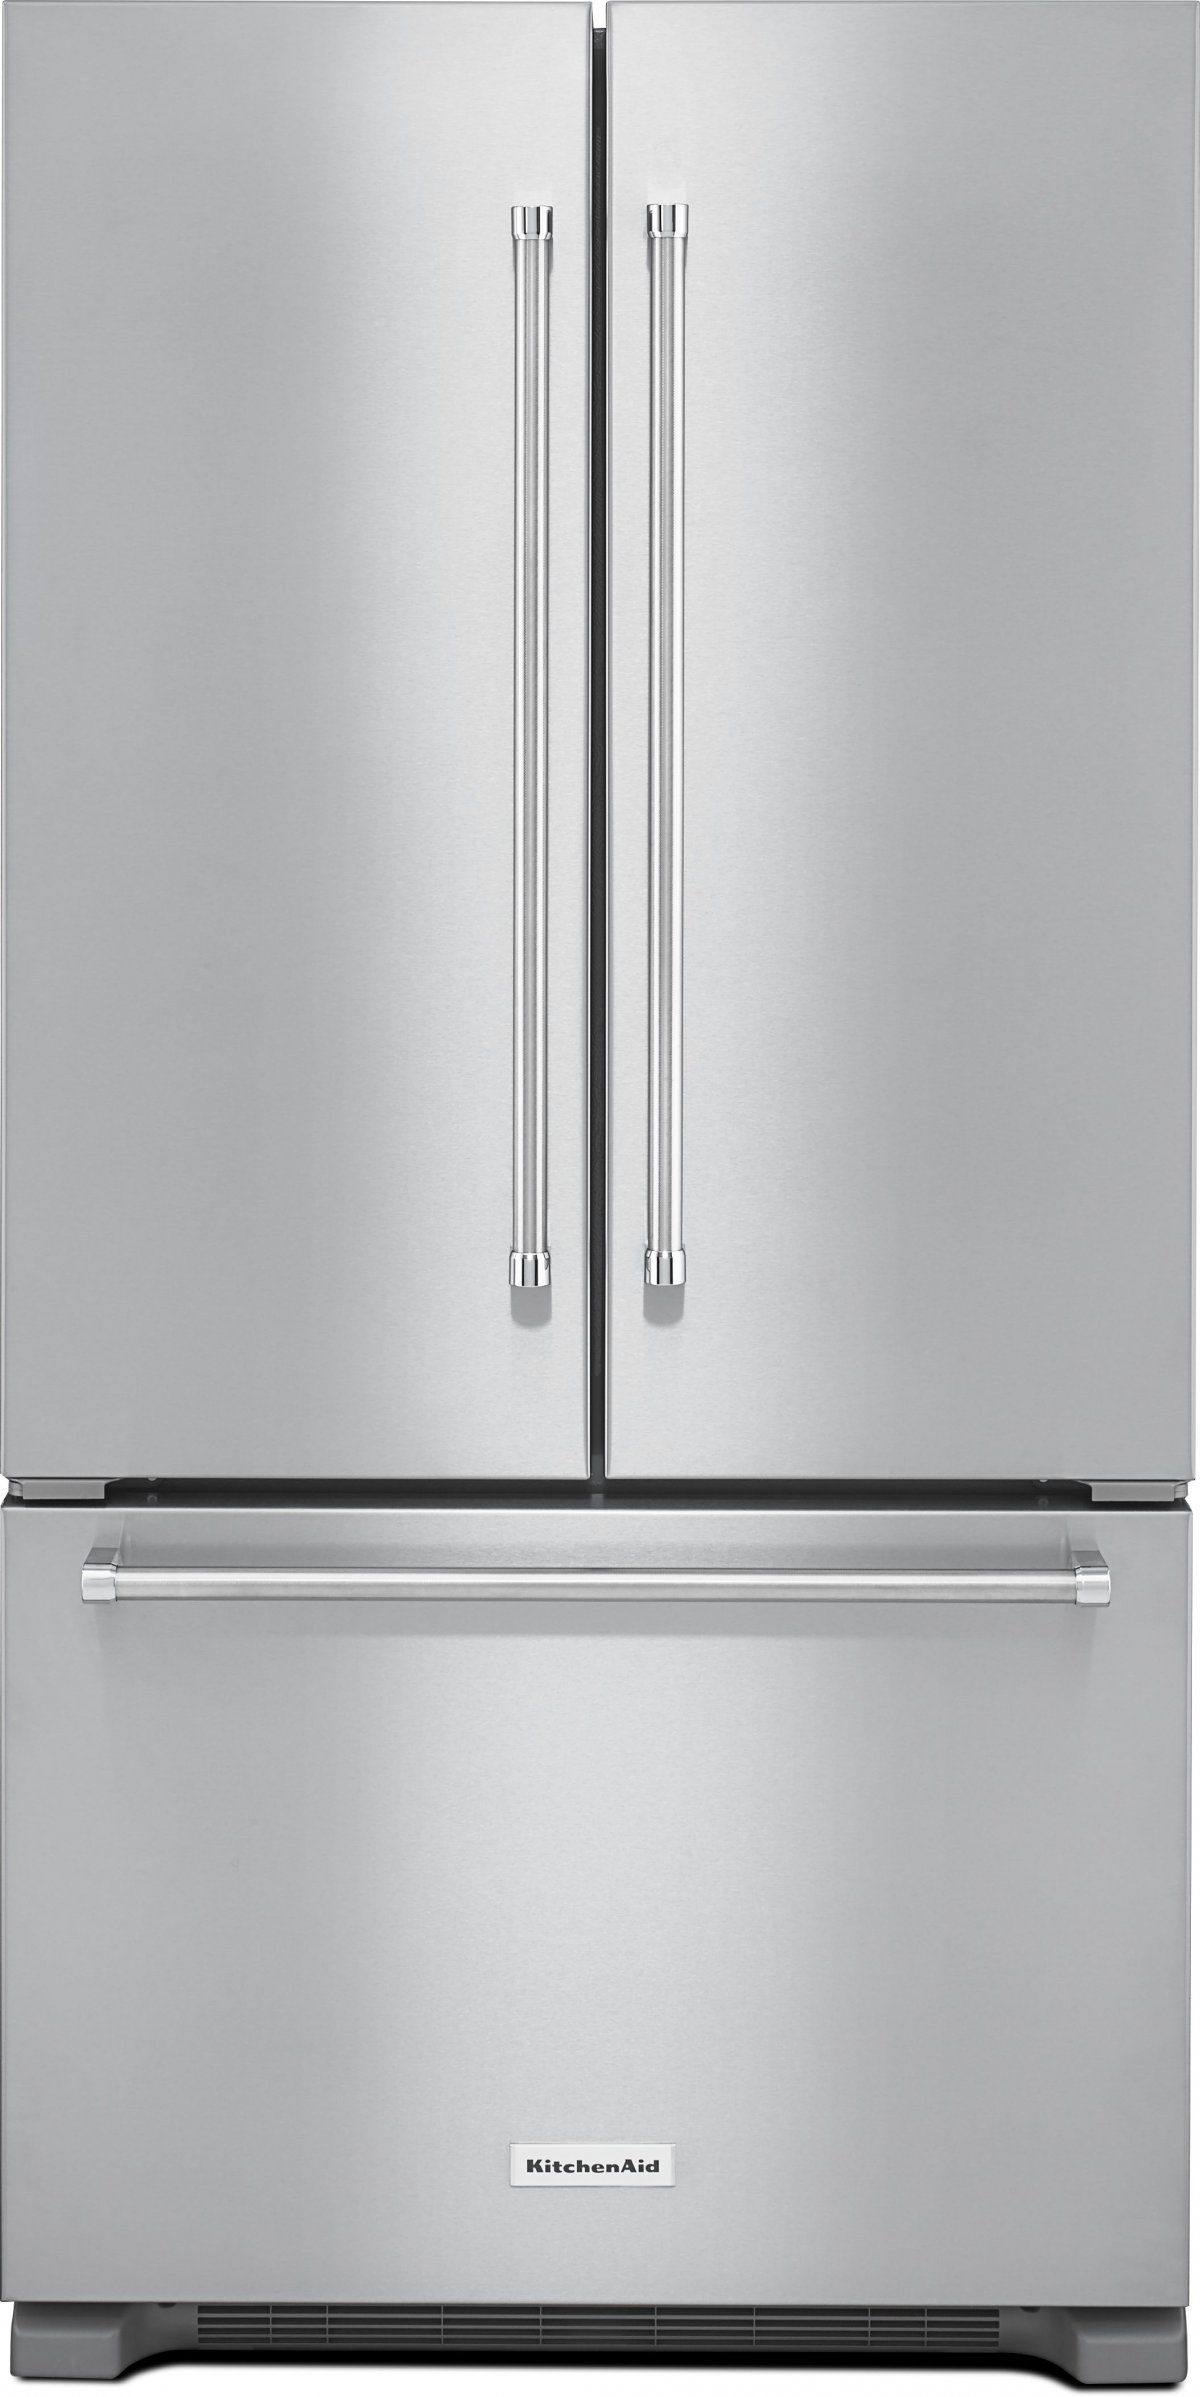 KitchenAid® 21.94 Cu. Ft. Stainless Steel Counter Depth French Door Refrigerator